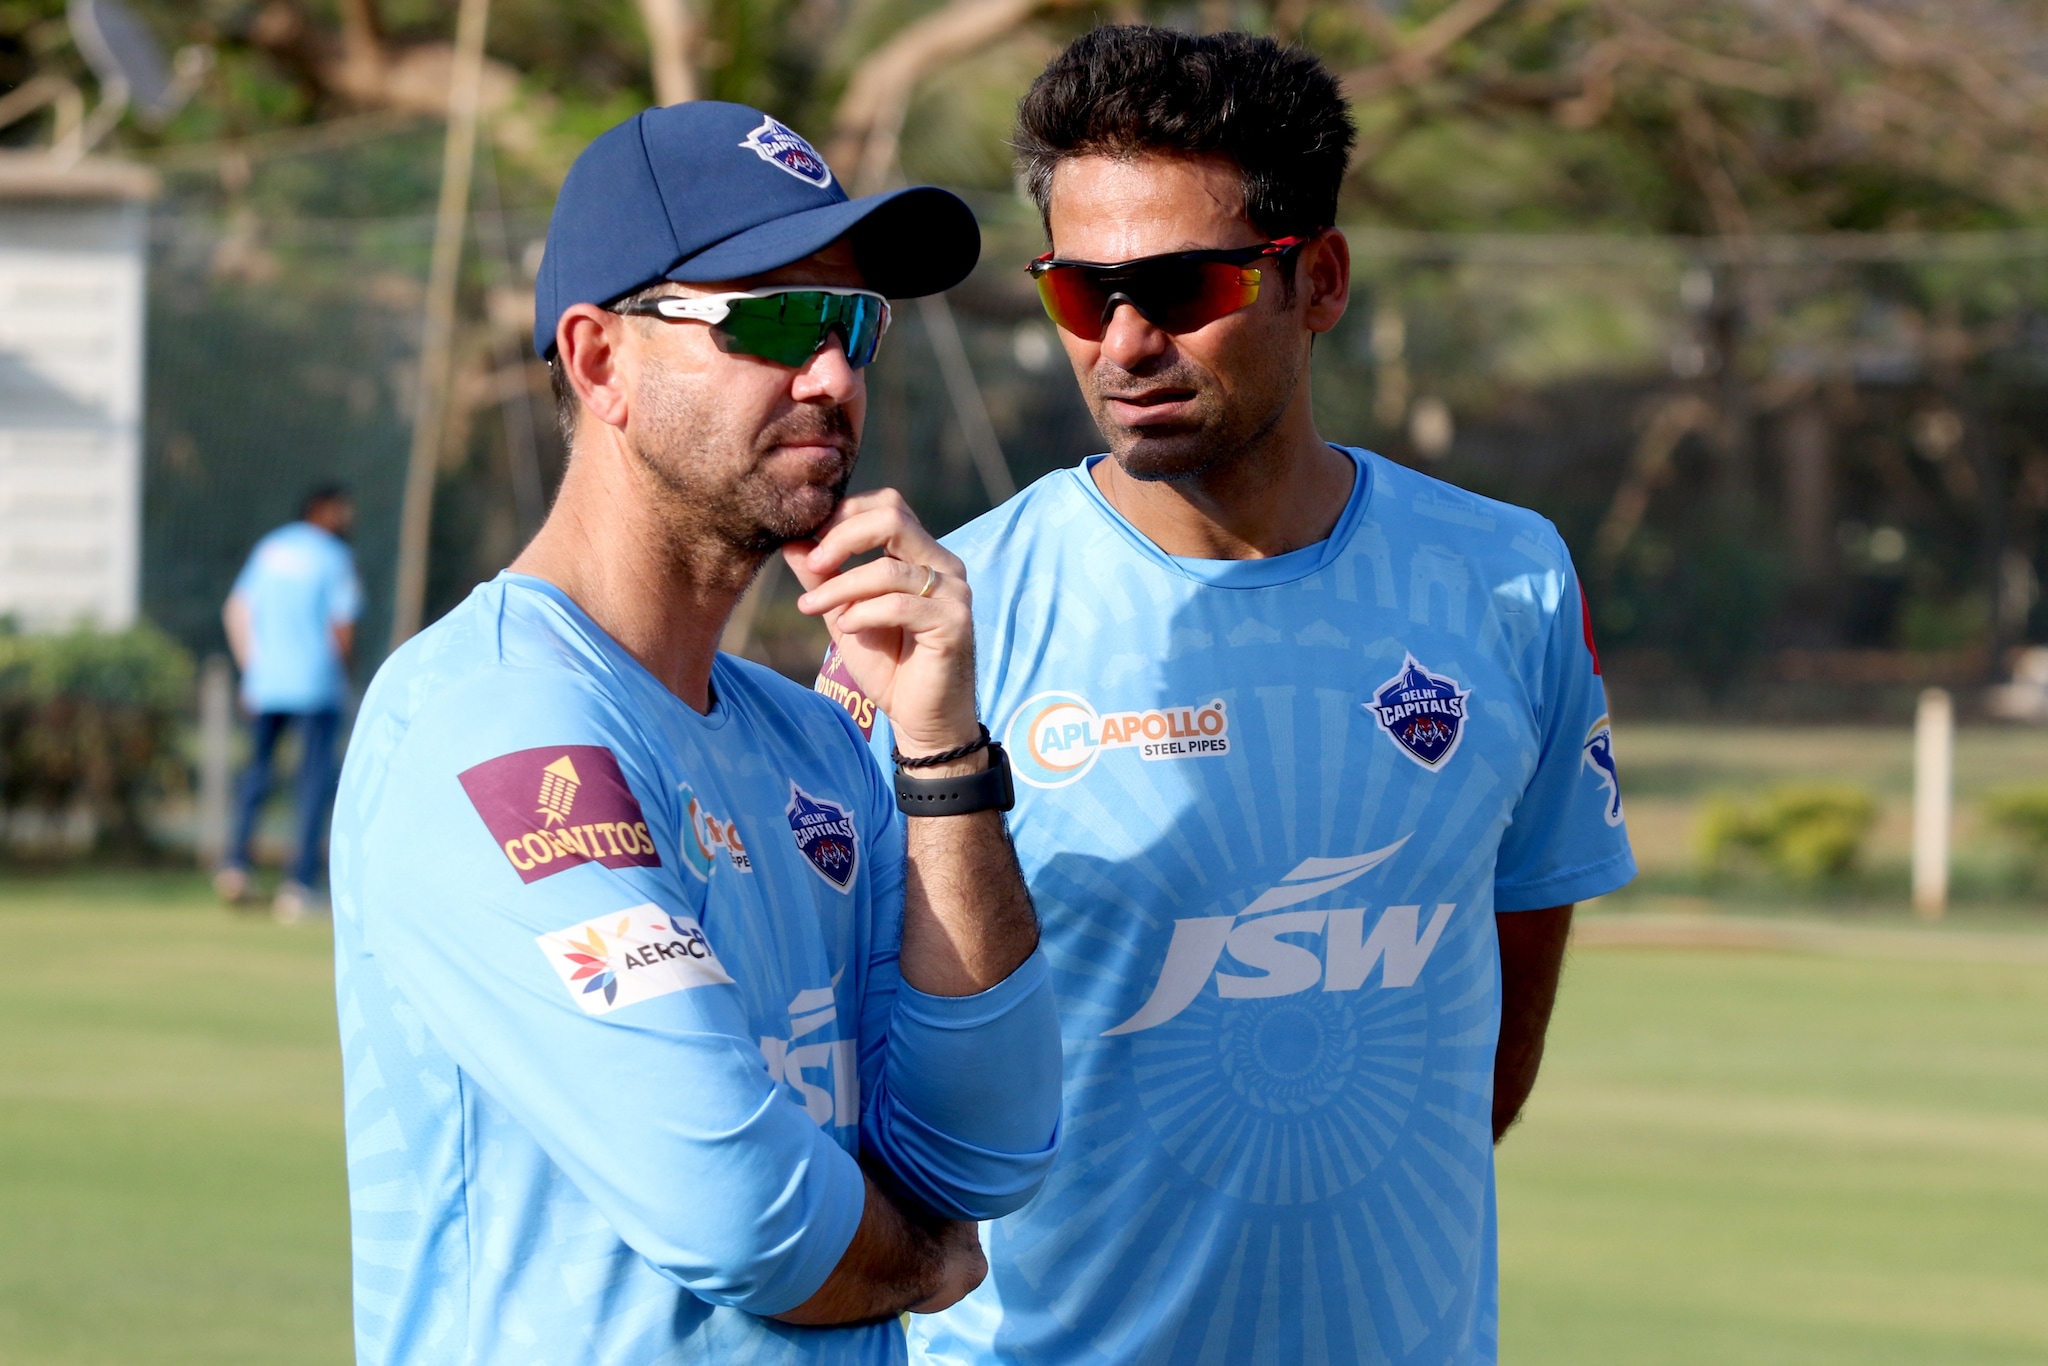 Delhi Capitals coach Ricky Ponting and assistant coach Mohammad Kaif during a practice session (Image: Twitter/@DelhiCapitals)